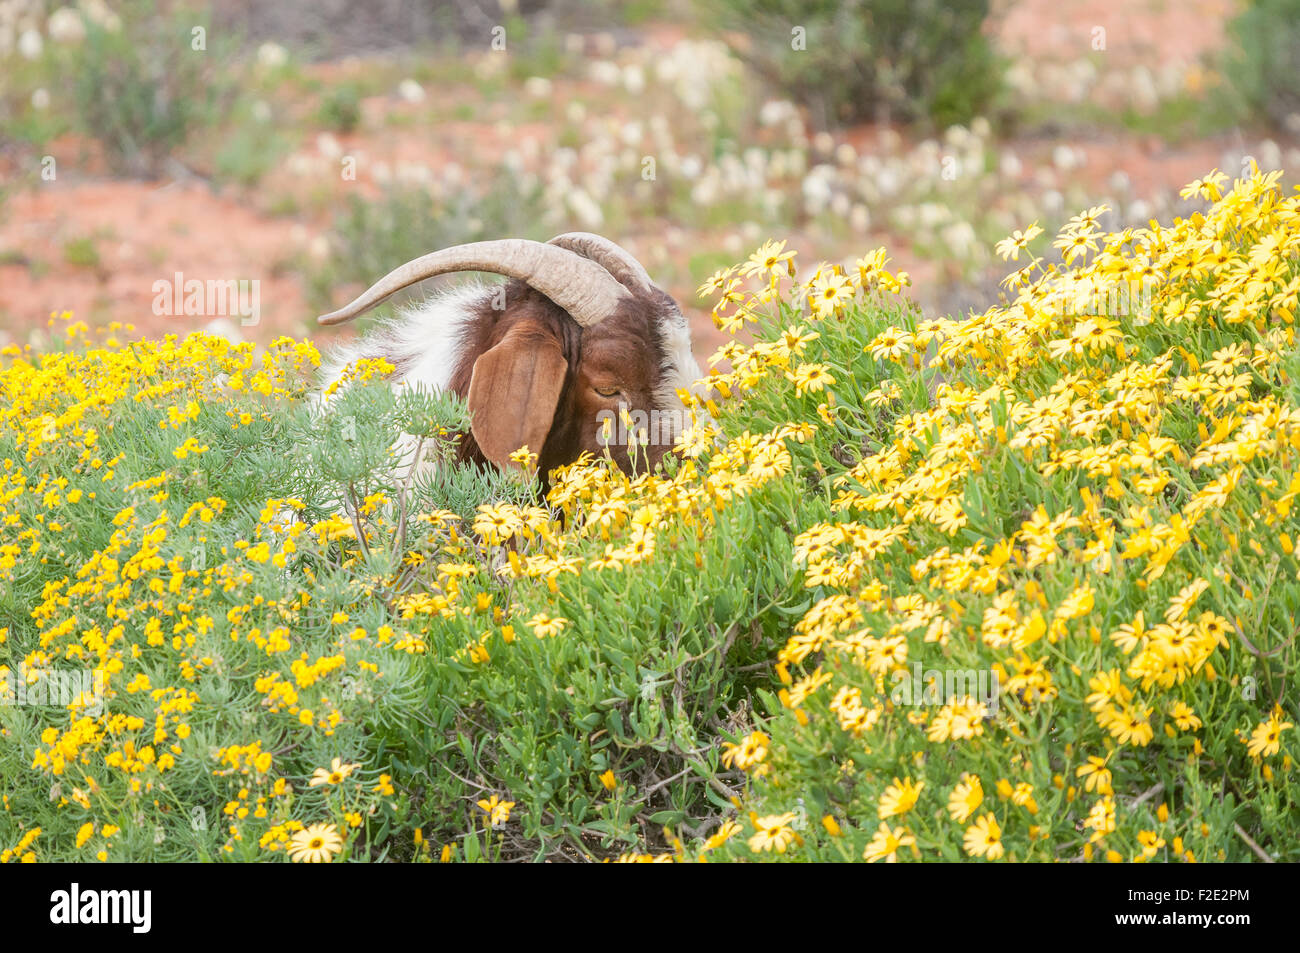 A boerbok (boer boer), a species indigenous to Africa, eats flowers near Strandfontein in the Western Cape Province Stock Photo